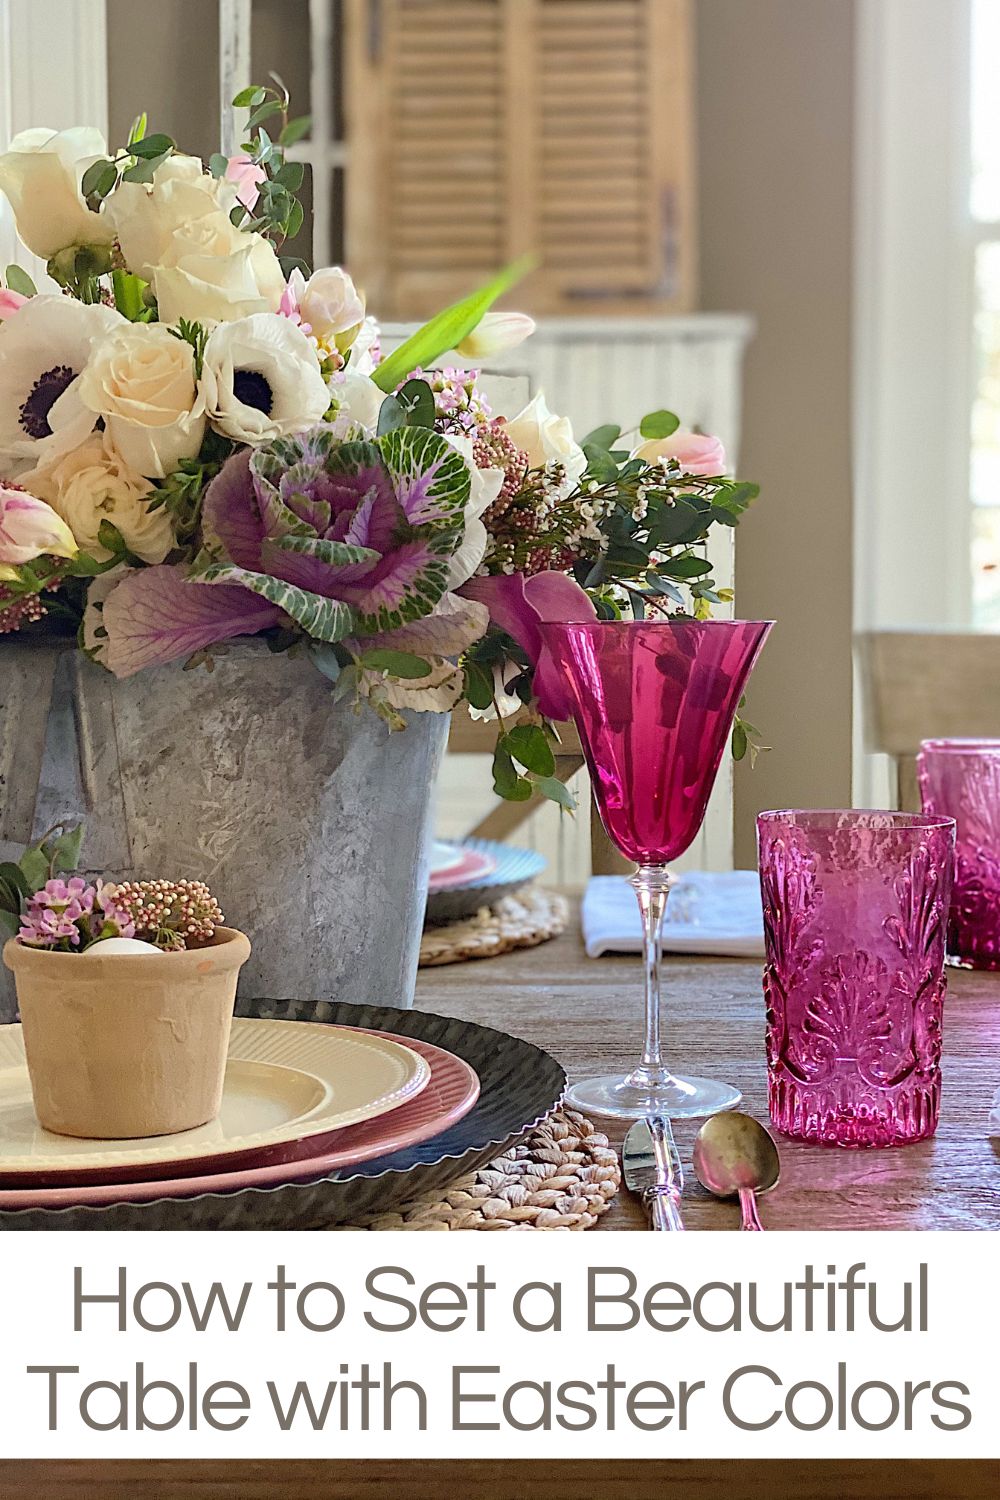 I am so excited to share my Easter ideas for my Easter brunch table. I love the bright Easter colors, and can't wait to share the florals, table setting, and fun glassware.